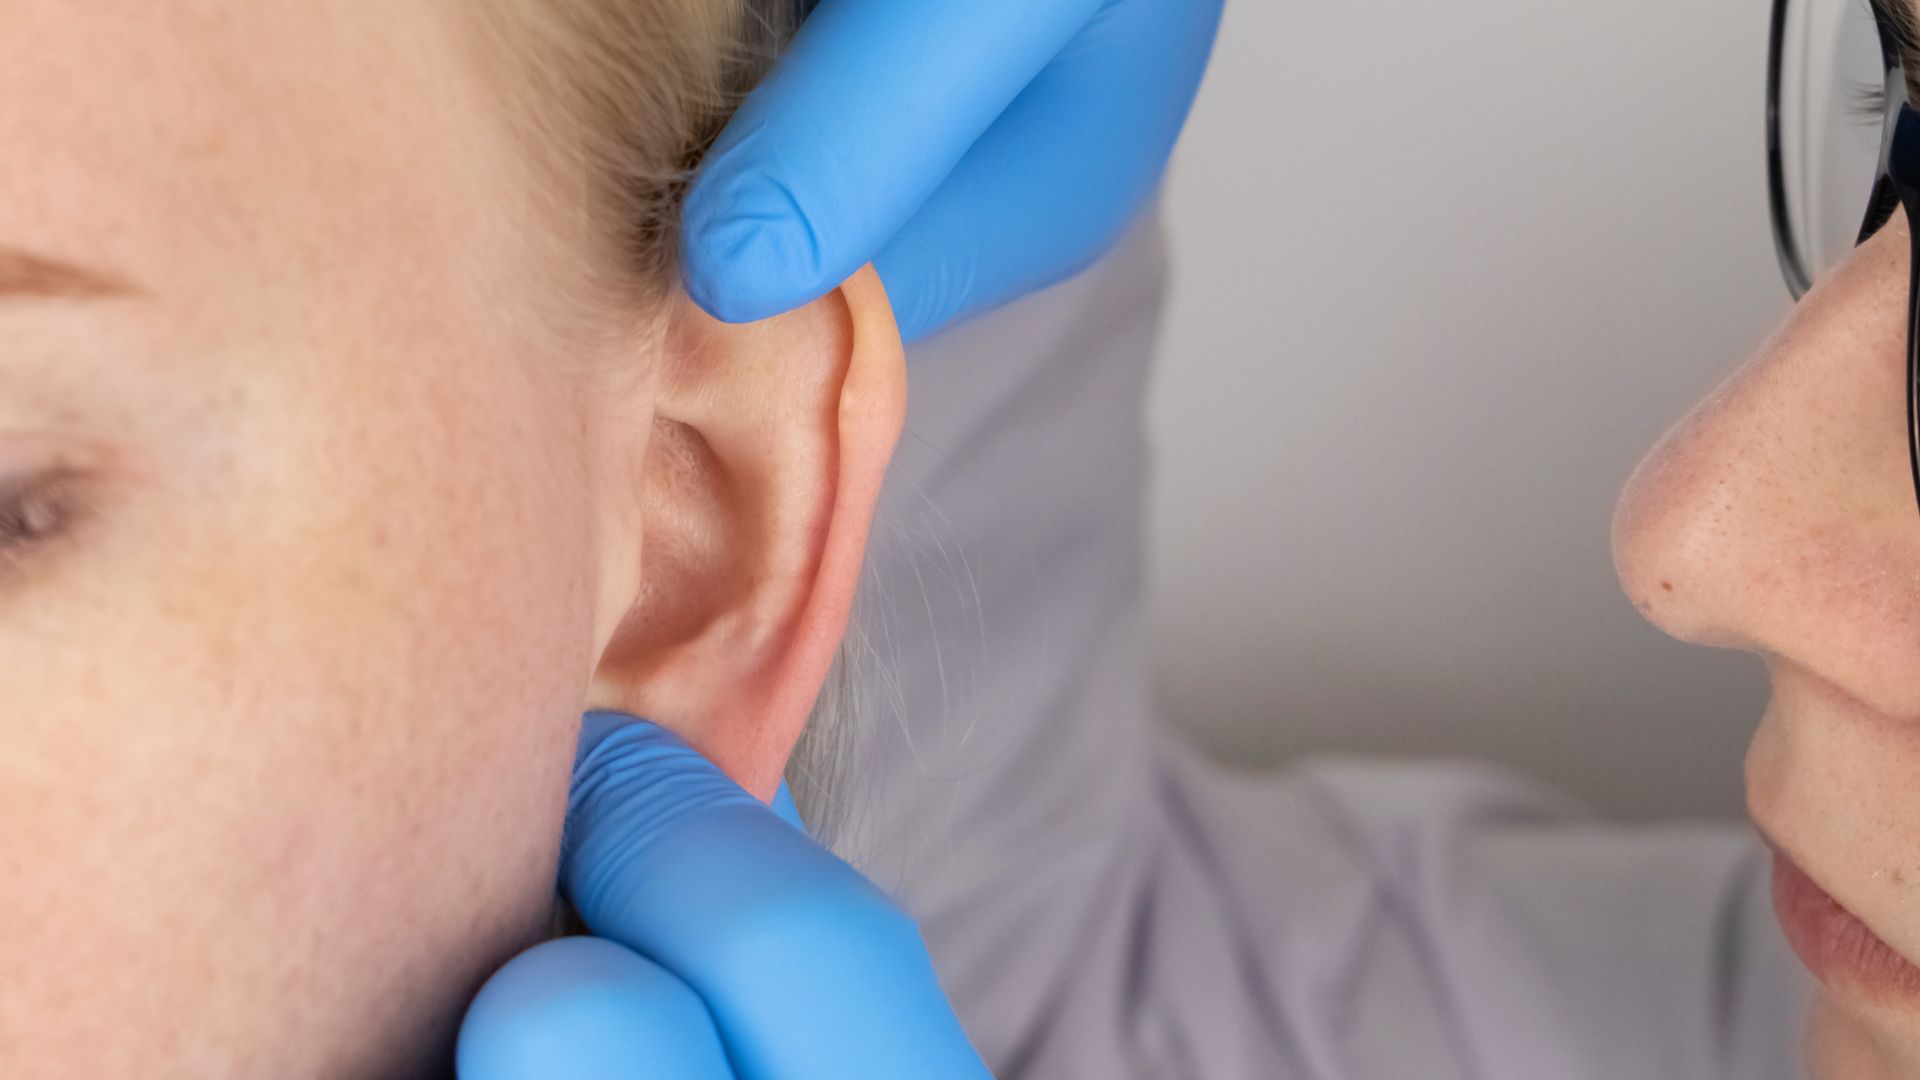 a gloved doctor holds a patient's ear and shows an example of a Darwin point on the outer cartilage